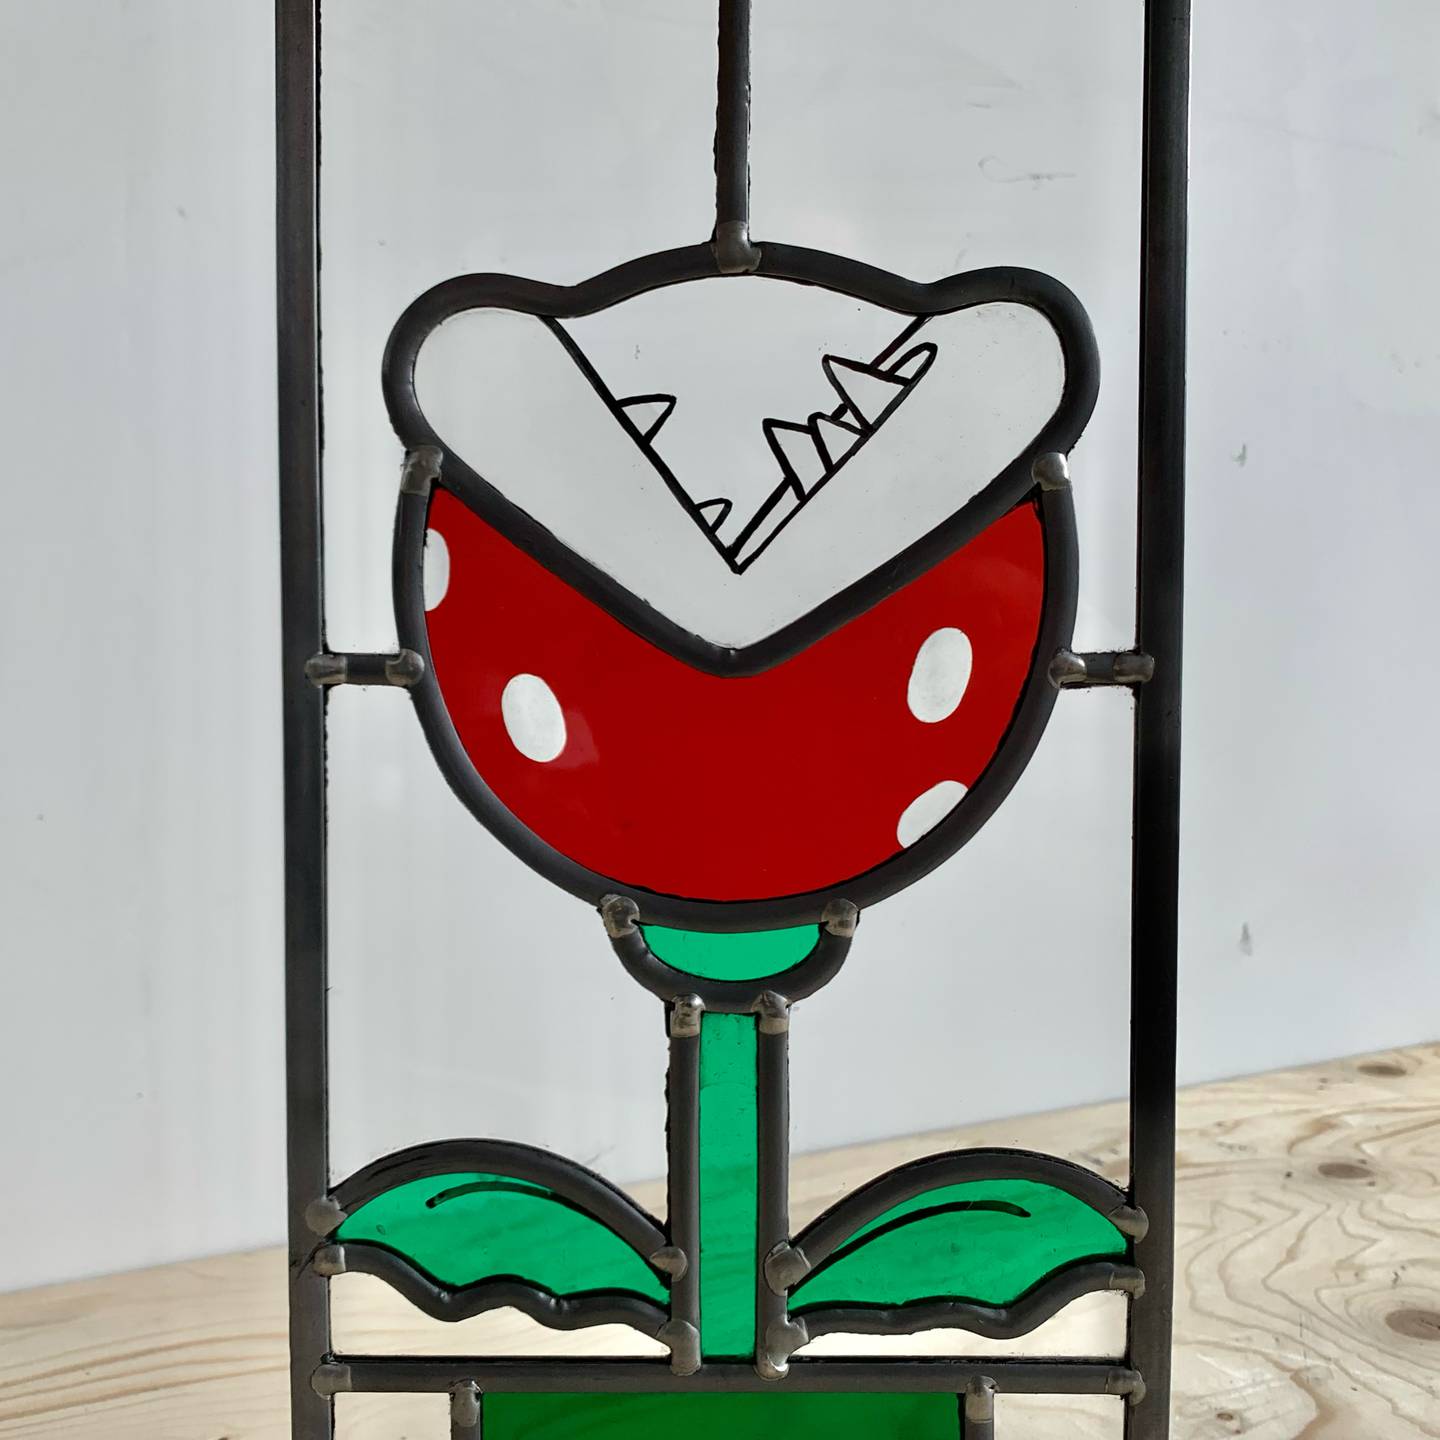 Dutch artist Arjan Boeve's rendition of the flower from Nintendo's 'Super Mario' video games, made from stained glass. Courtesy Arjan Boeve